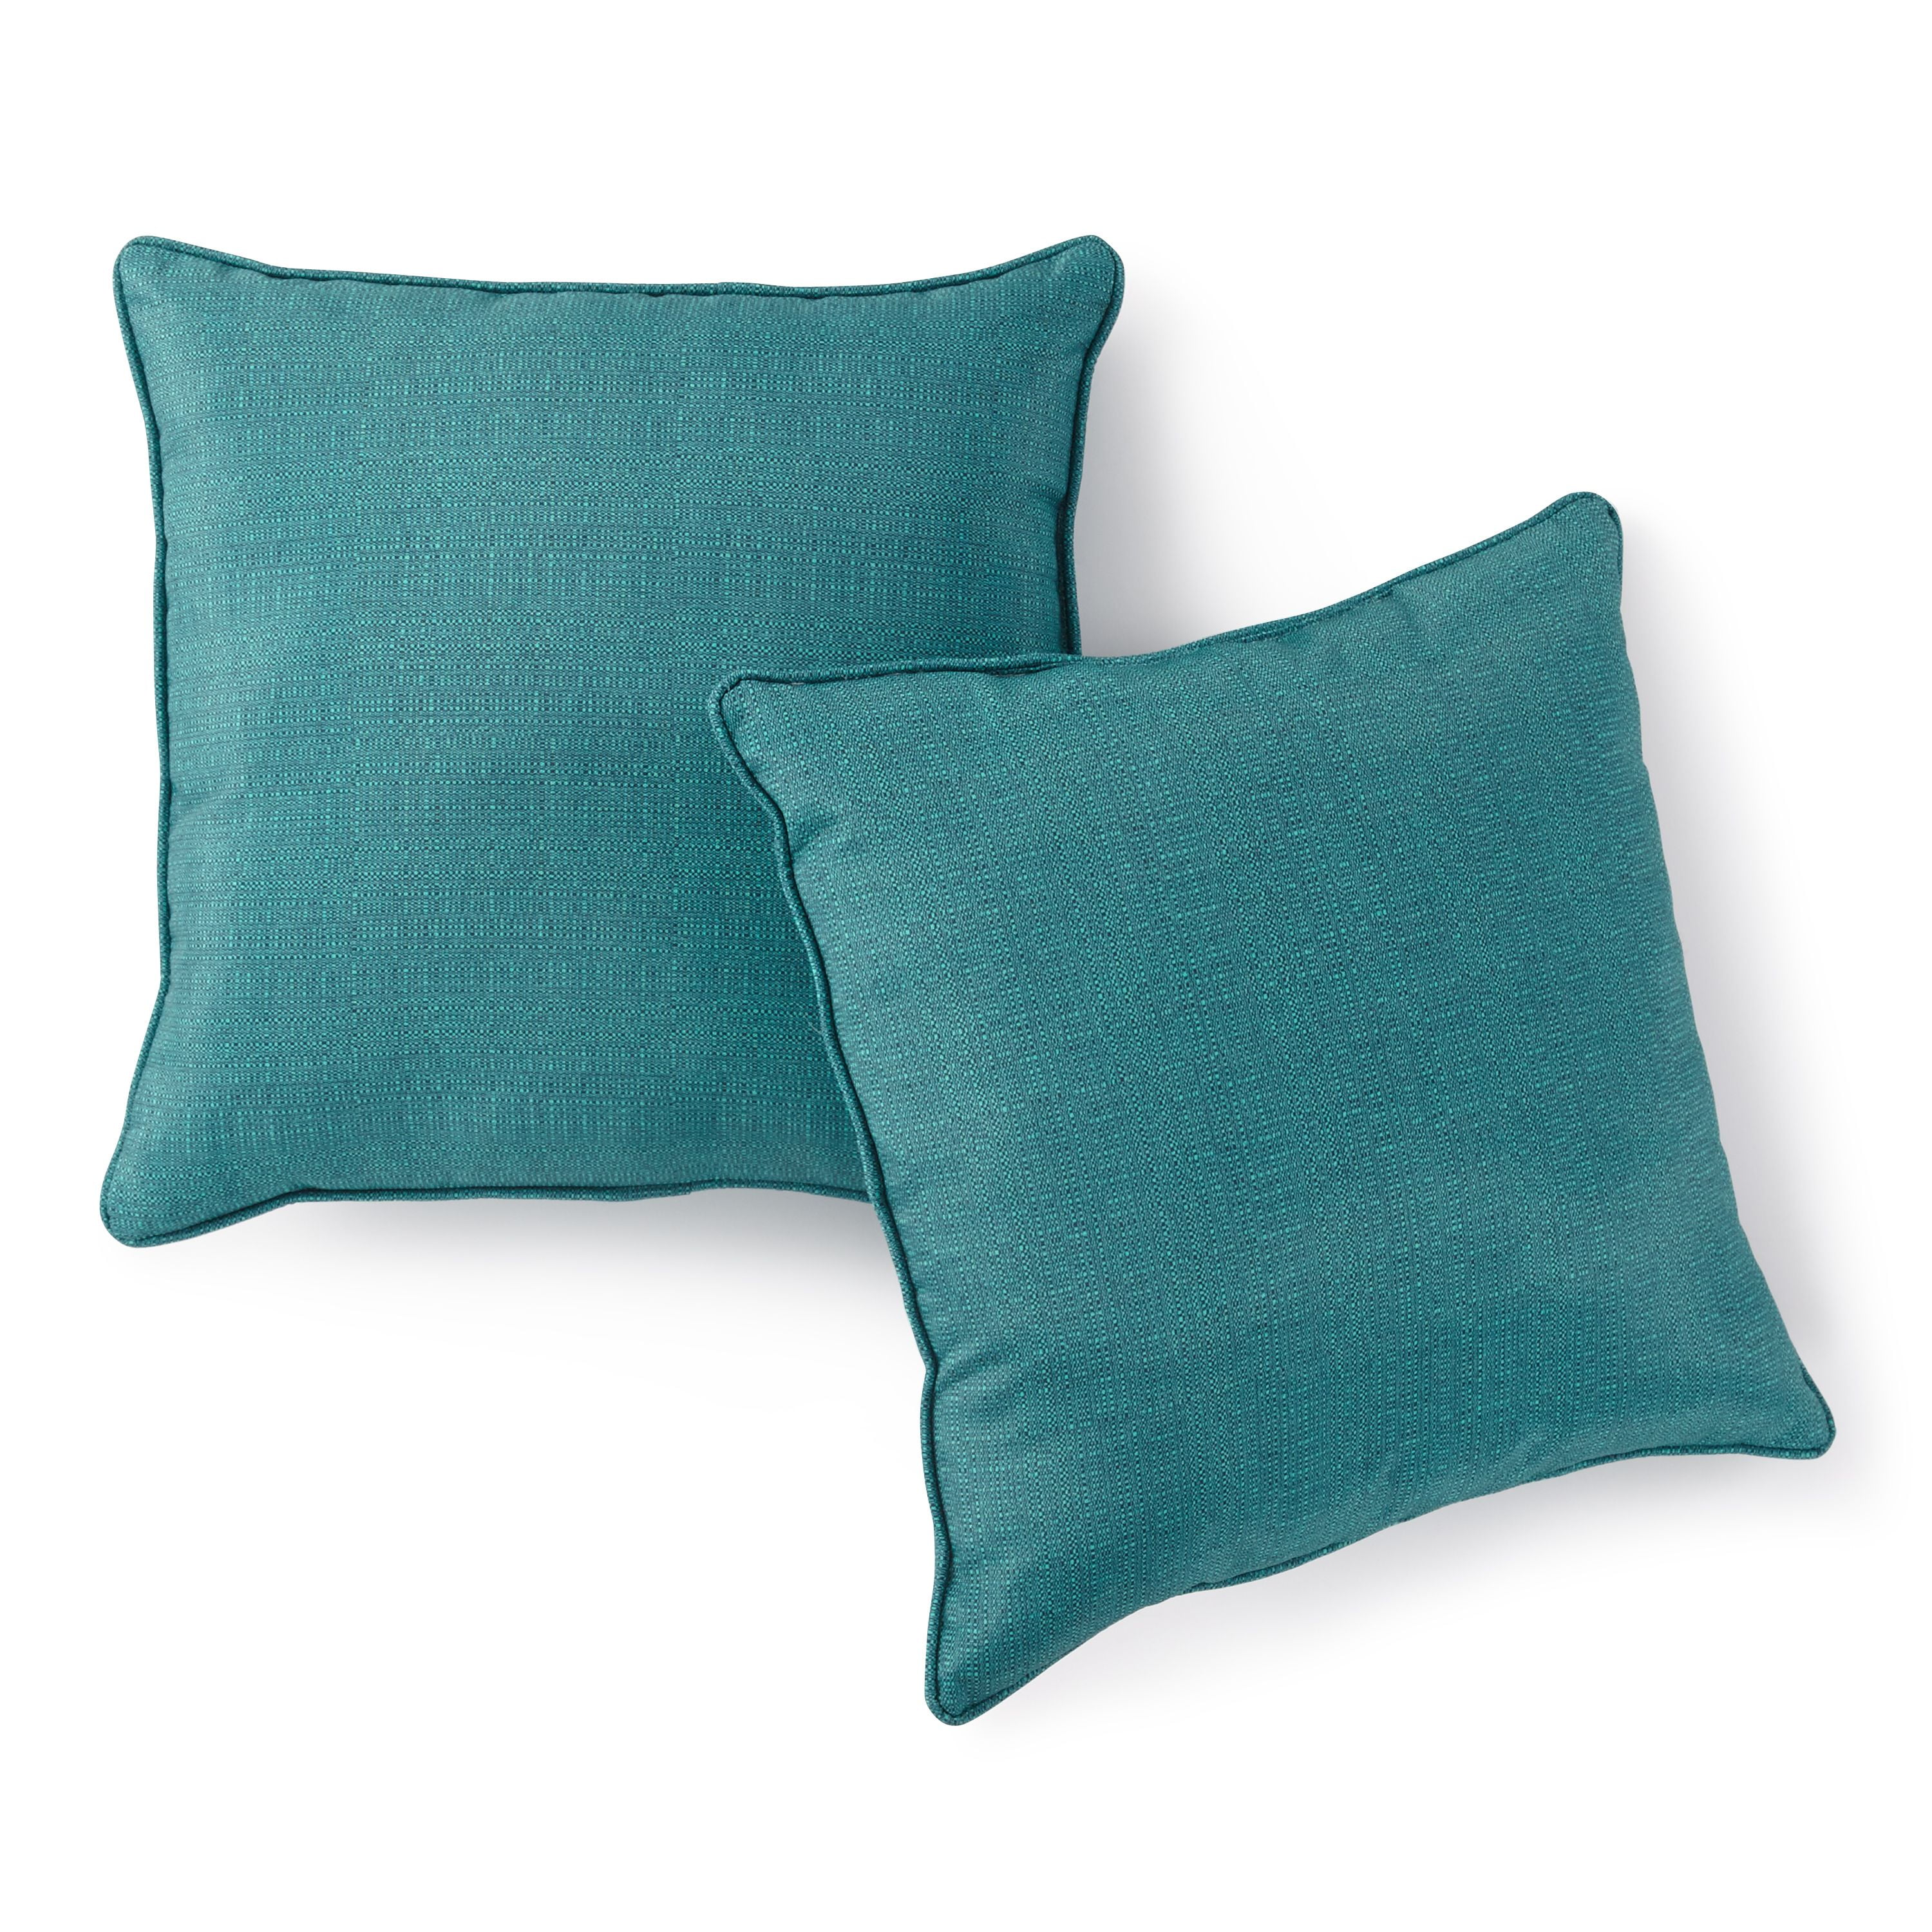 Mainstays Textured Teal 18 in. Throw Pillow Set of 2